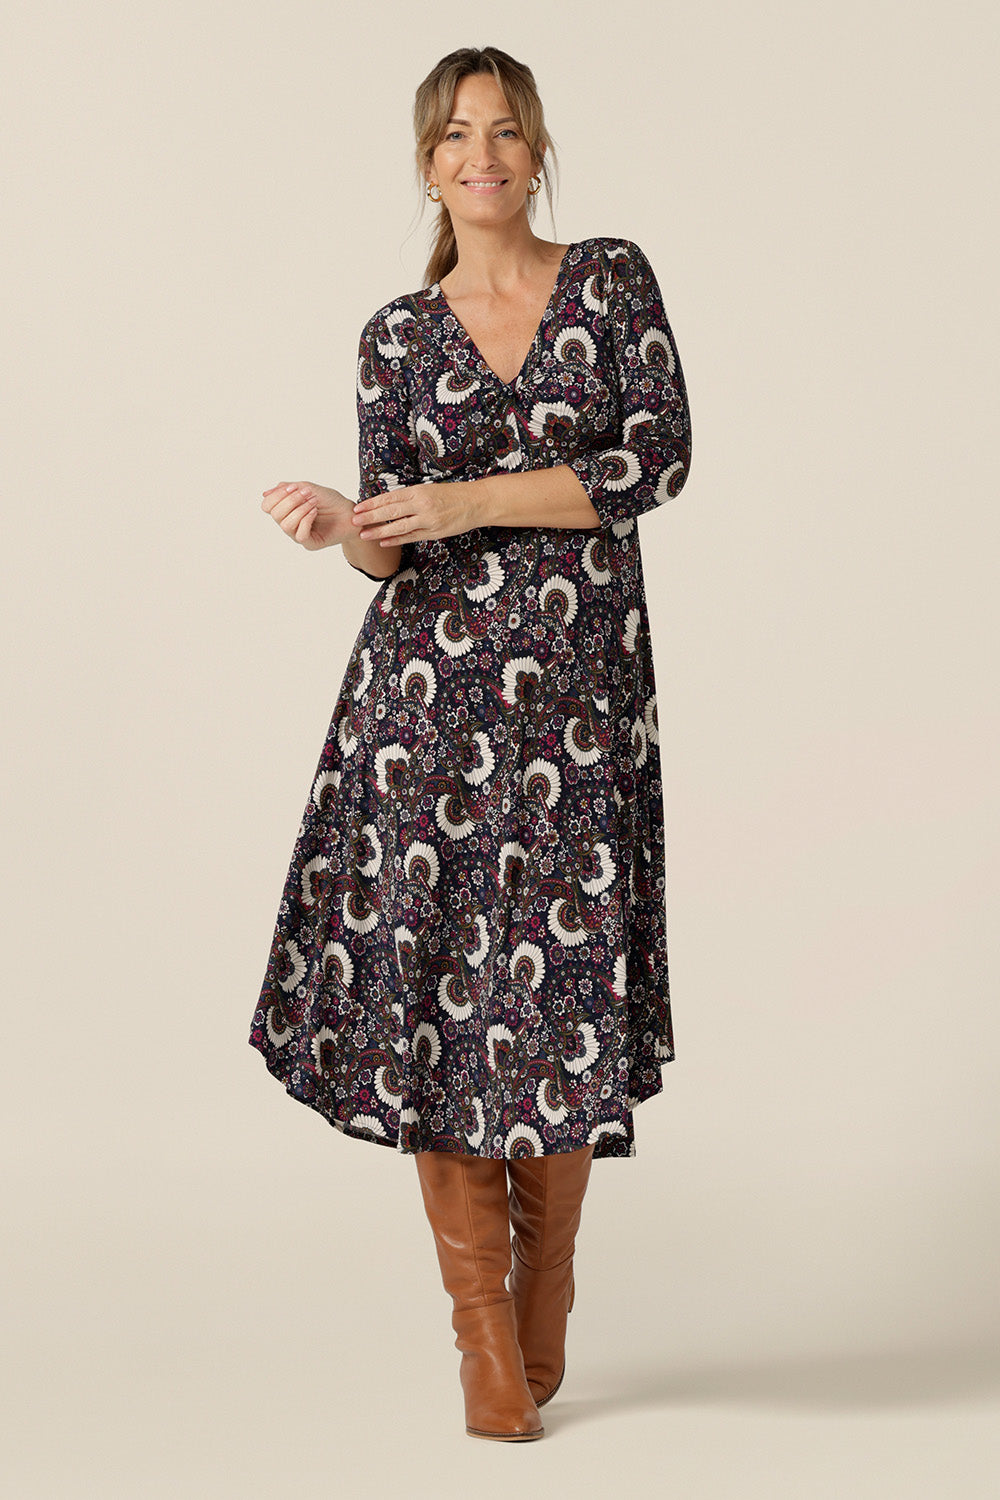 A size 10, 40 plus woman wears a 3/4 sleeve empire line dress with twist front bodice ad dipped, calf length hem. Made in Australia by Australian and New Zealand women's clothing brand, L&F this paisley print jersey dress is available to shop in sizes 8 to 24.  